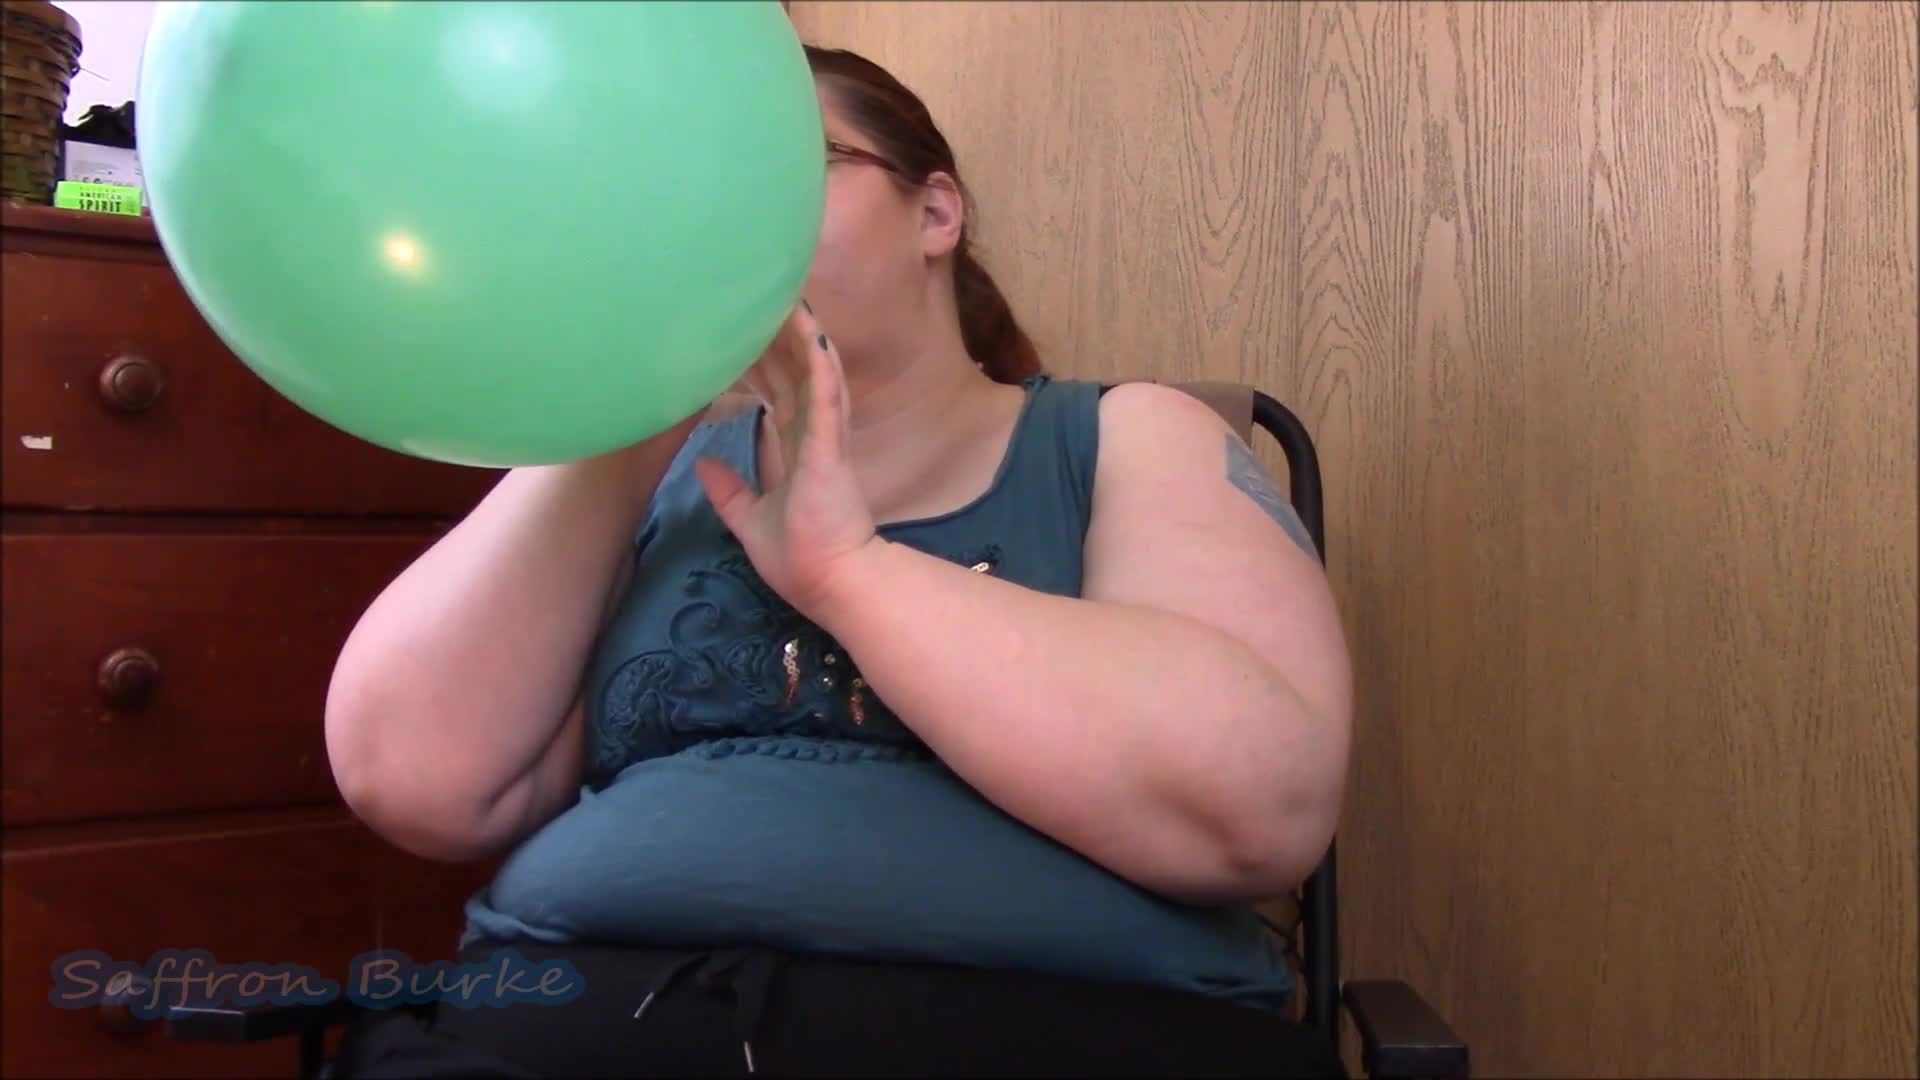 Blowing up Balloons